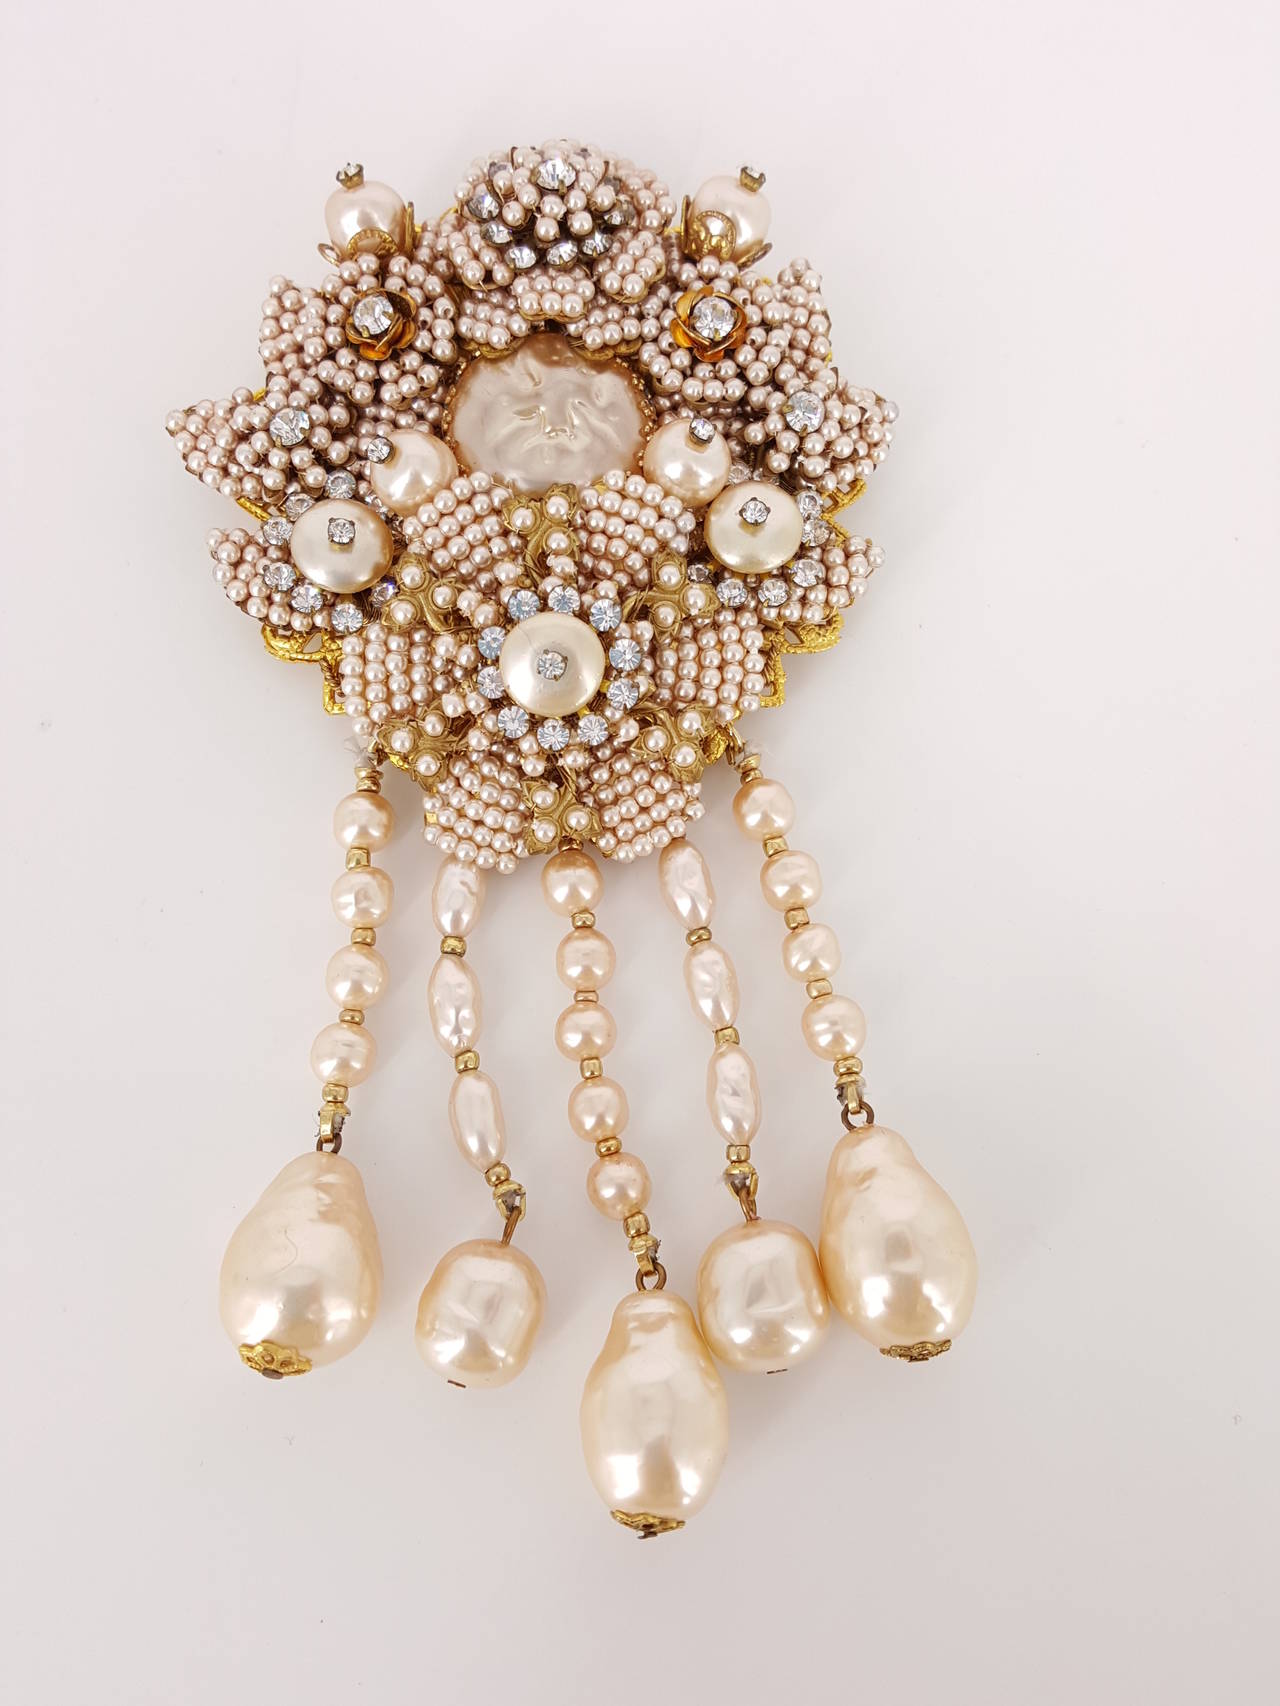 Offered for sale is this gorgeous large brooch and earrings  by Stanley Hagler of N.Y.  The soft pinkish Baroque pearls and seed pearls are accented with rhinestones set in flowers.  There are for strands of baroque pearls that hange from the bottom